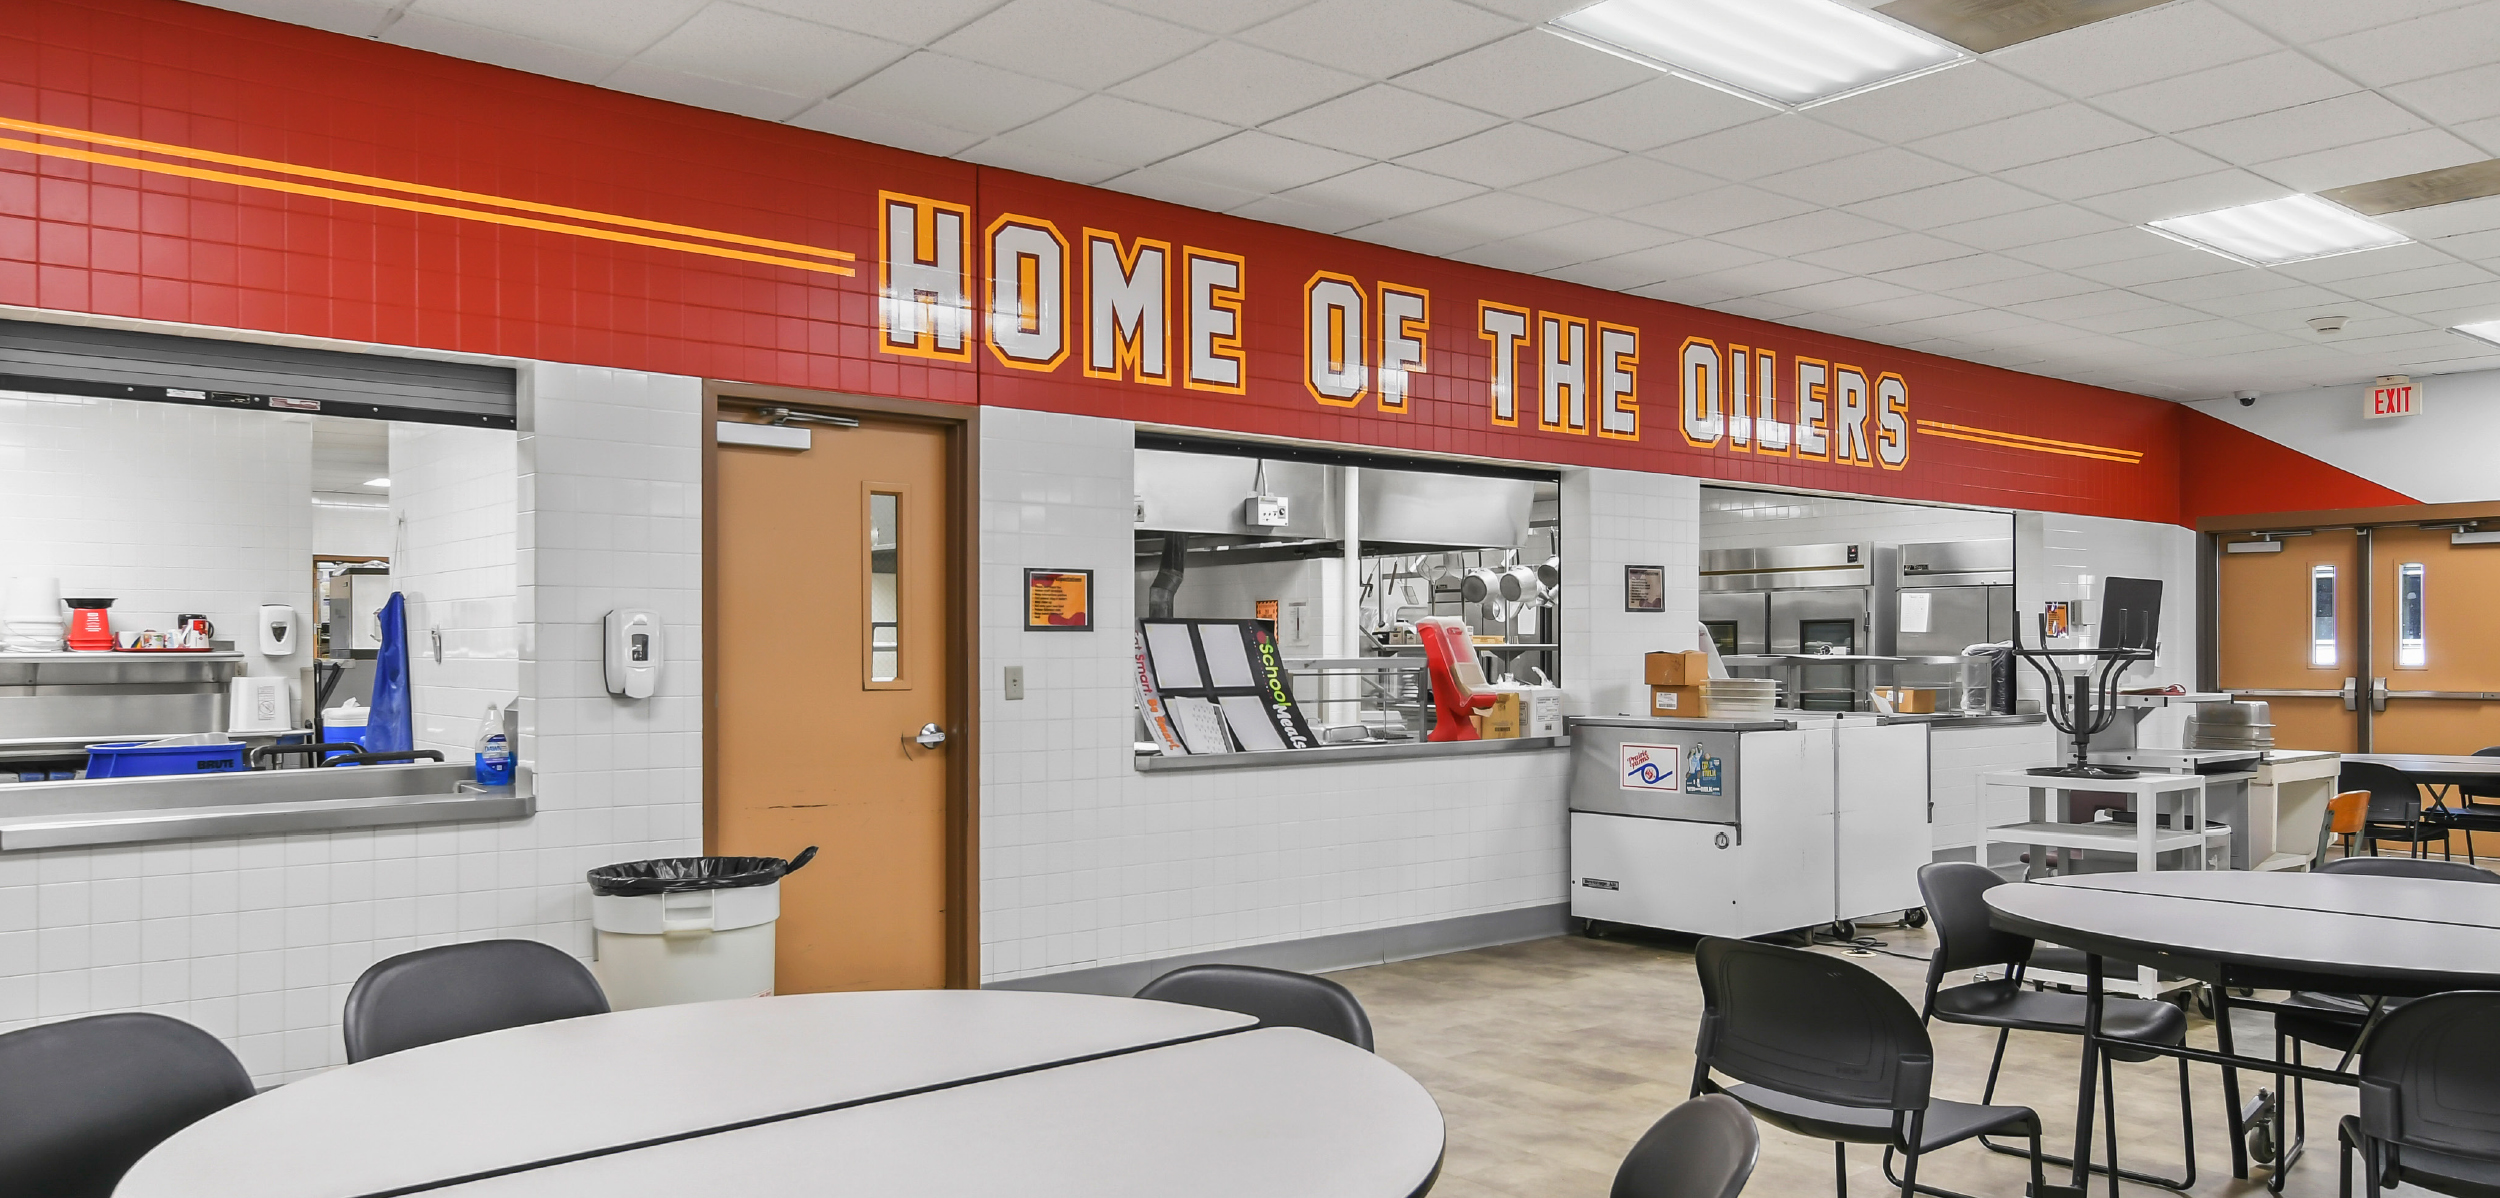 Environmental Graphics in Cafe in East Alton School